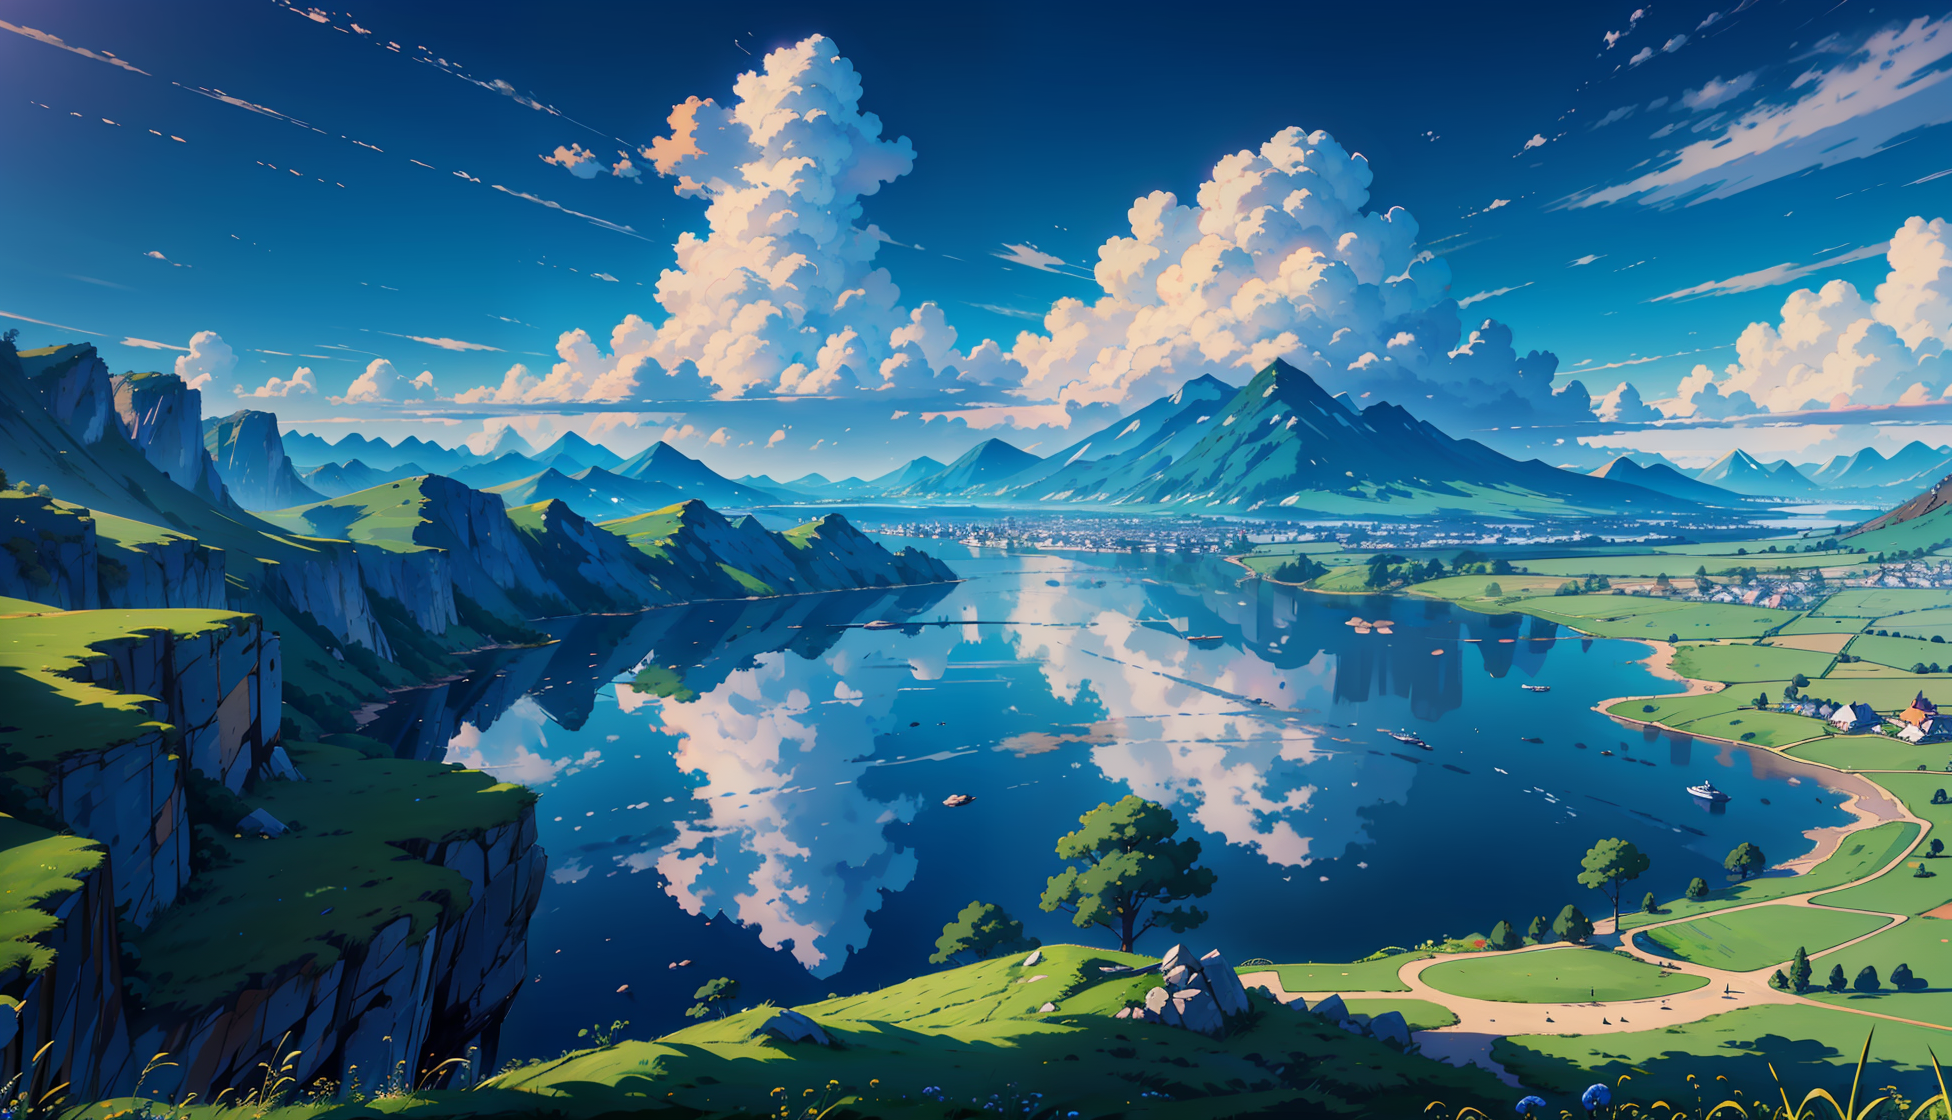 41 Anime Landscape Wallpapers for iPhone and Android by Matthew Gonzales